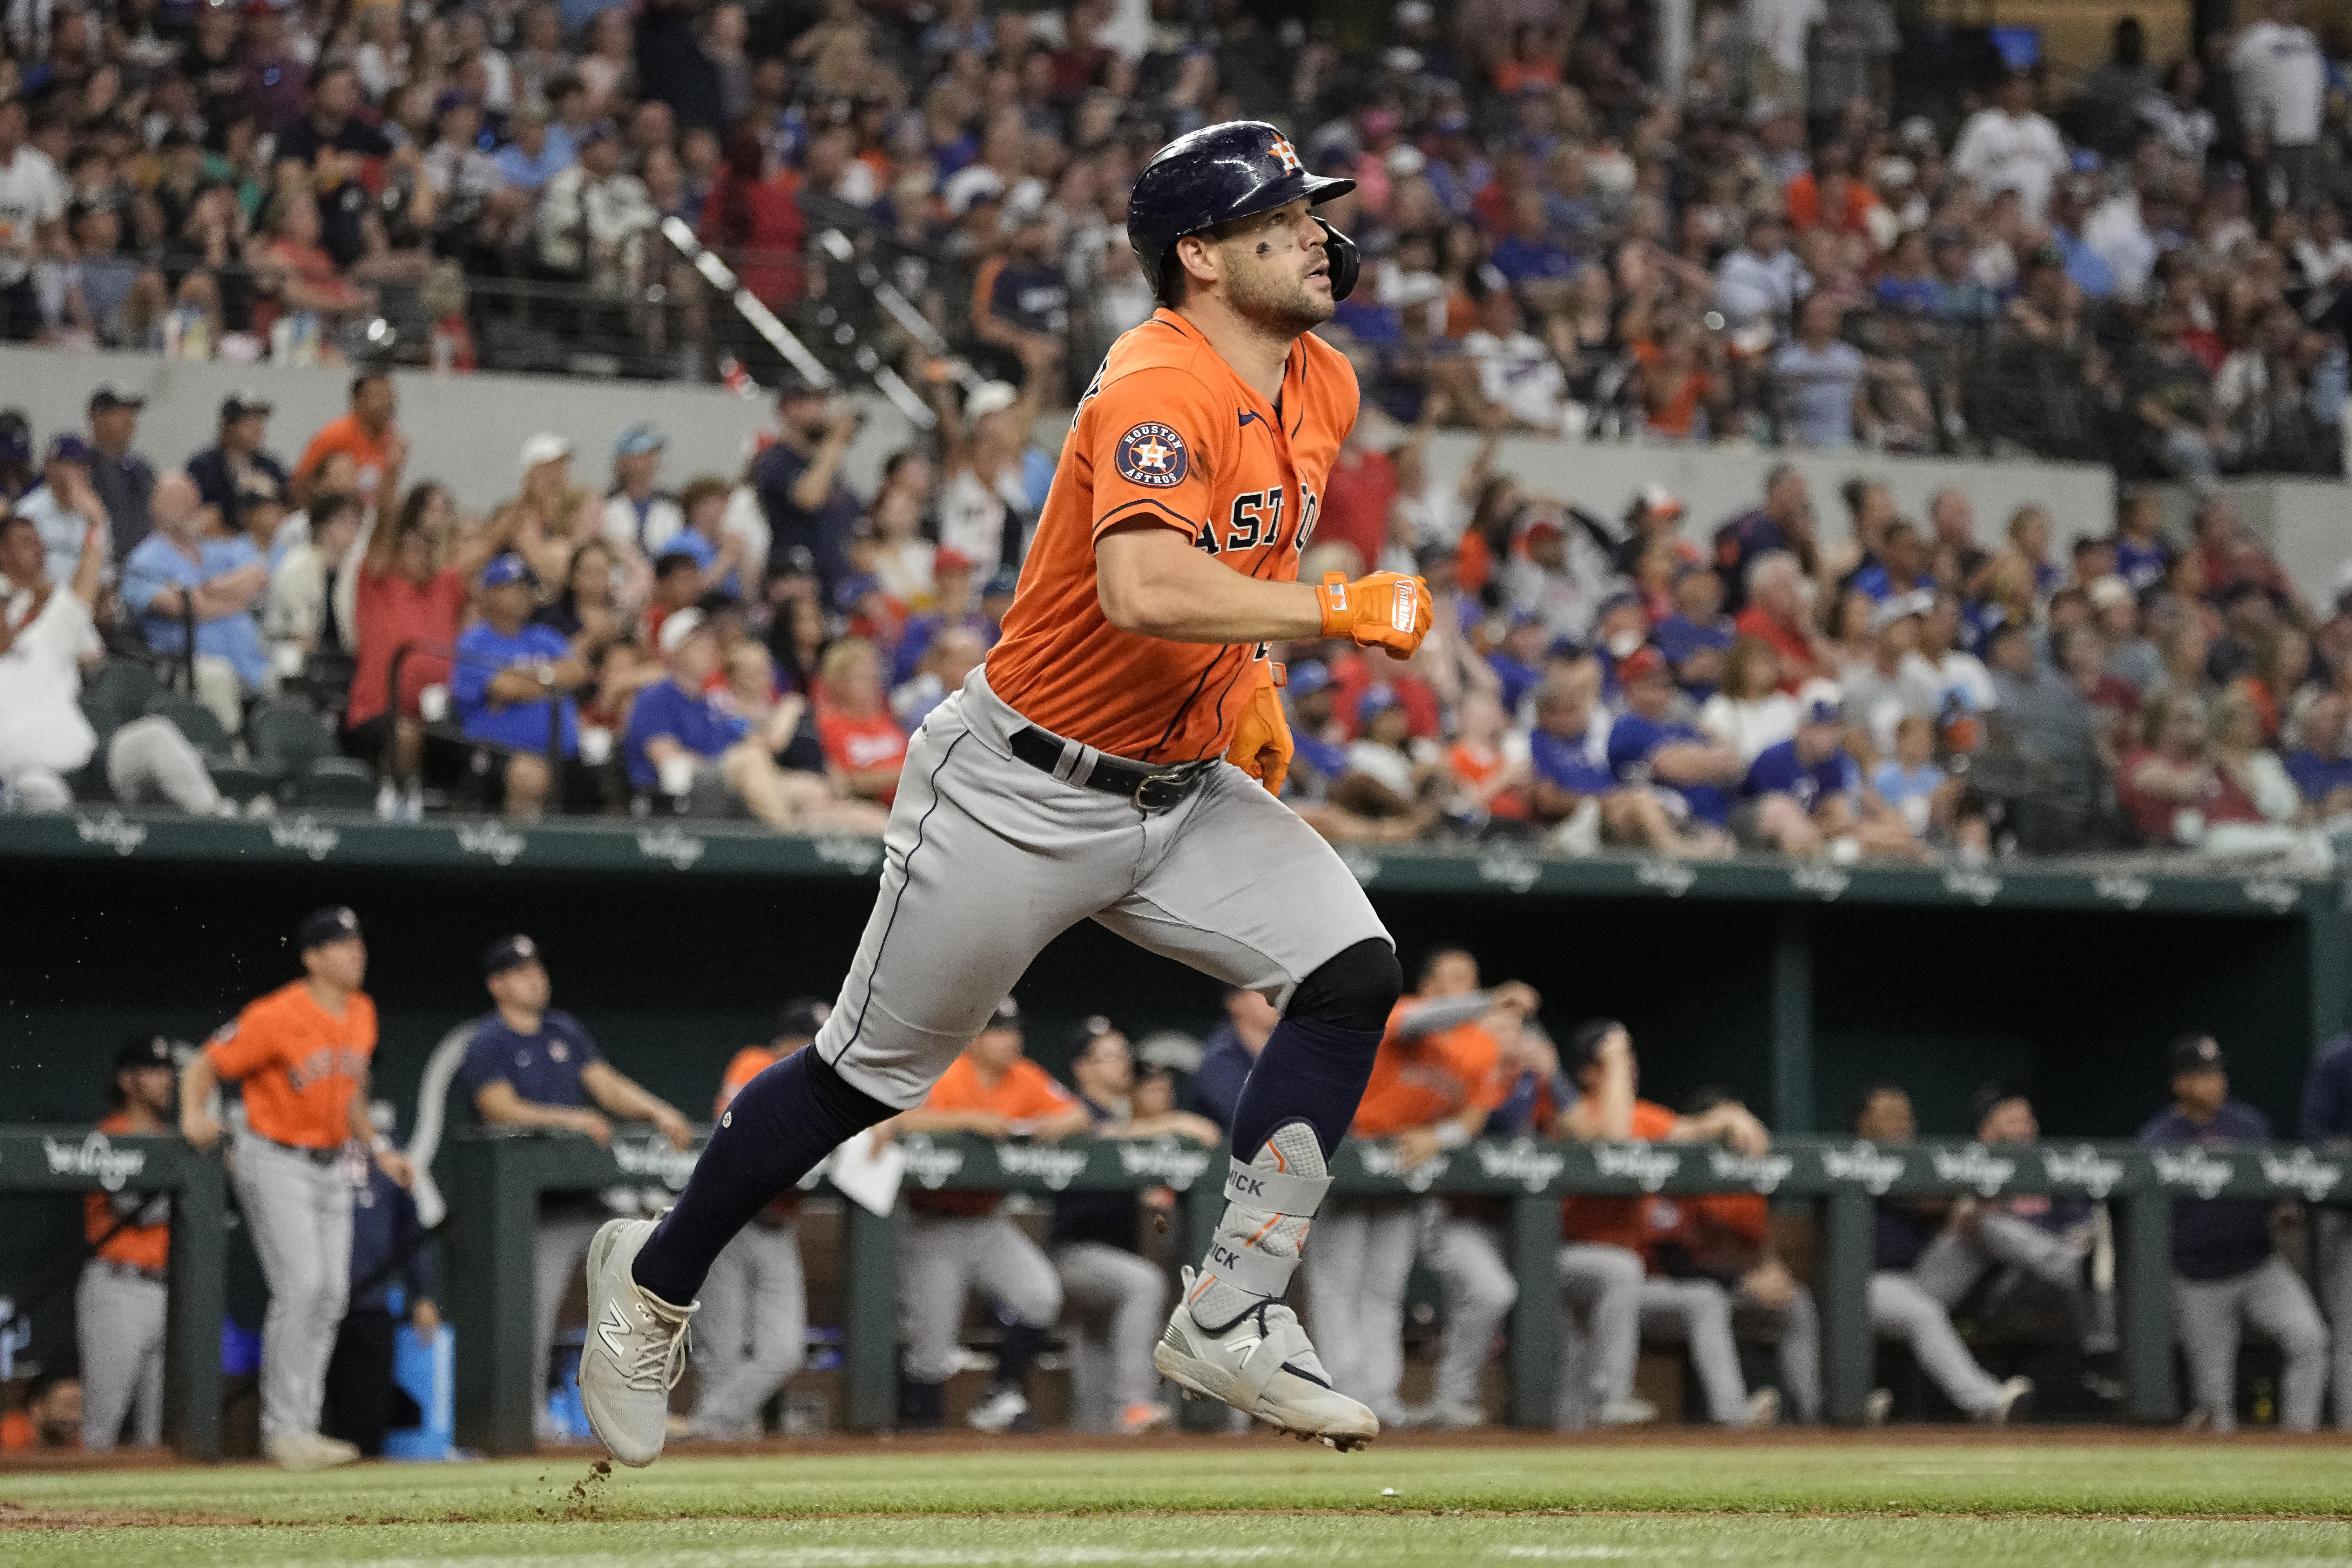 Houston Astros: Ryan Pressly remains on injured list with neck soreness